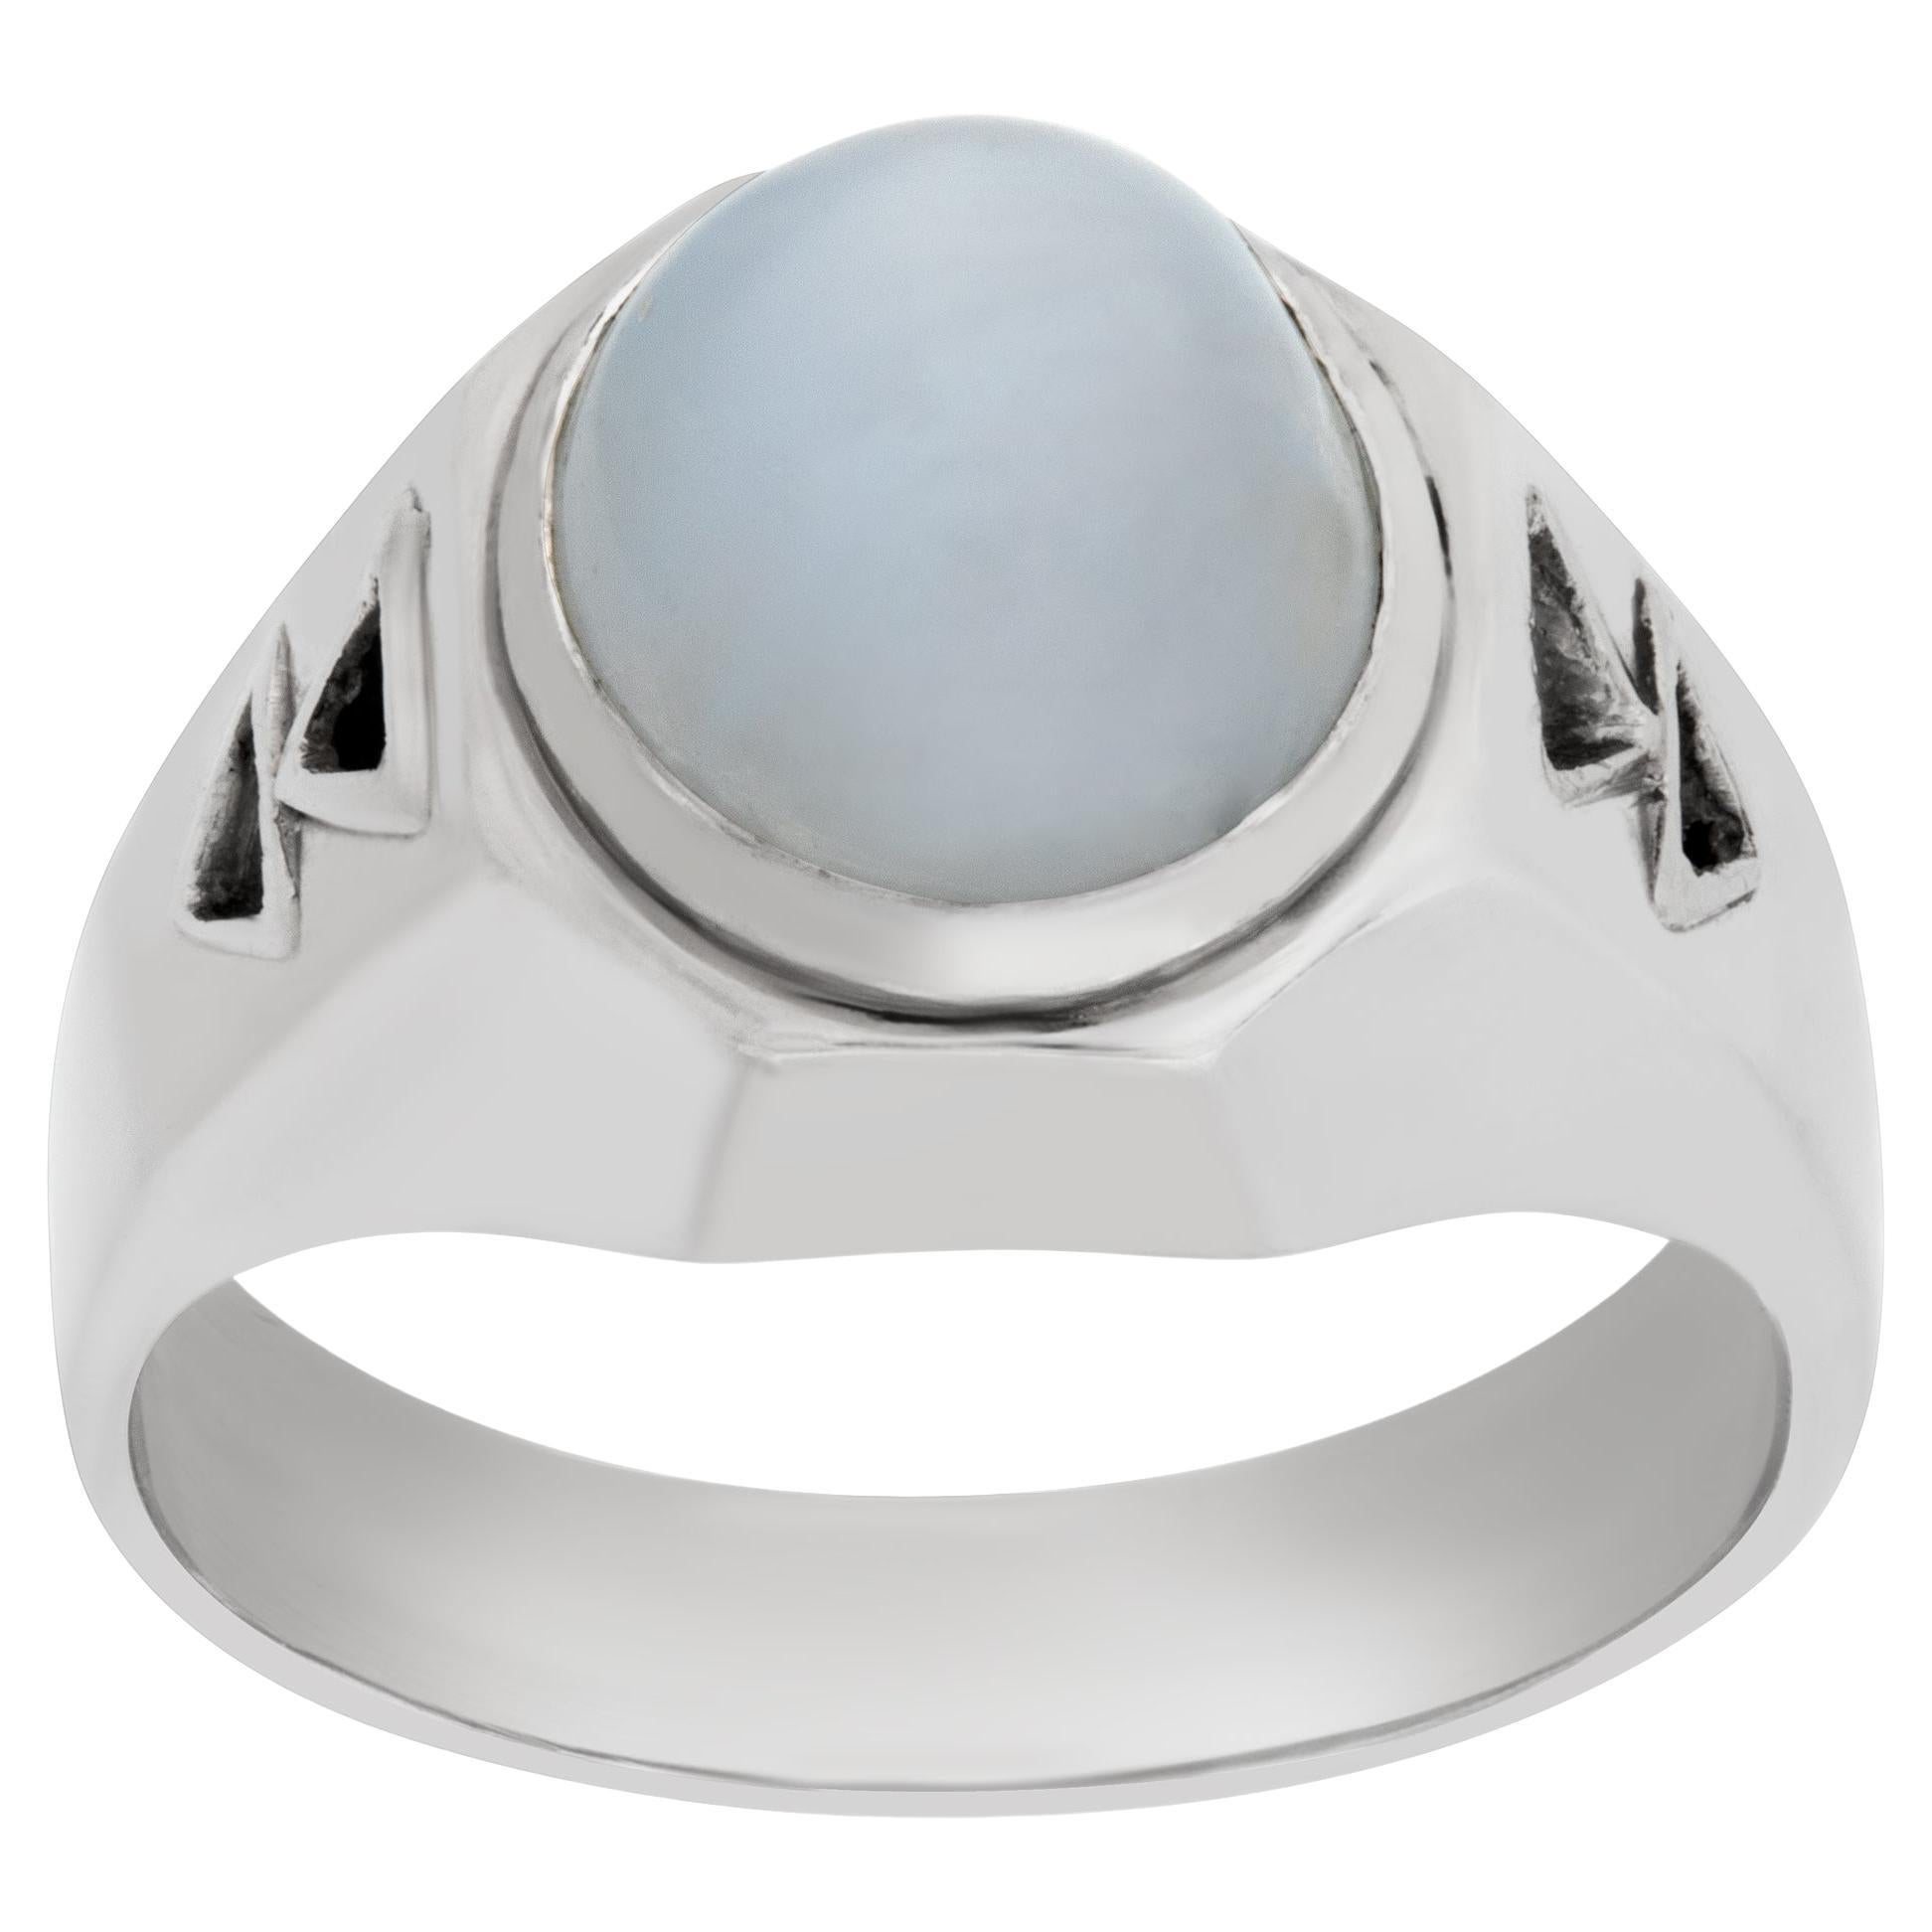 Platinum ring with a center star sapphire approx. 4 carats